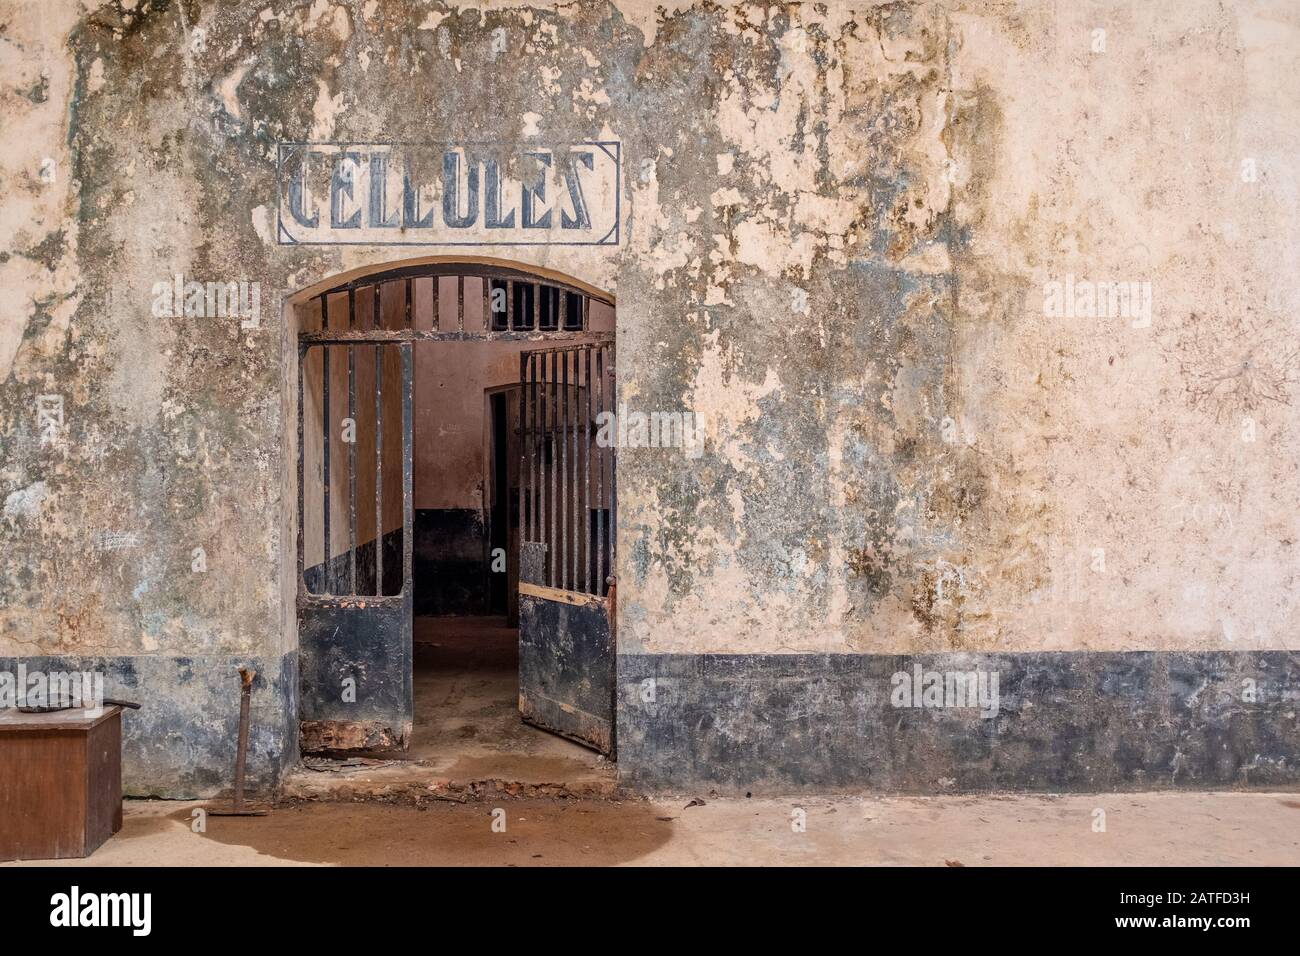 Entrance to the cells of an abandoned penal colony or jail on Salvation's Islands, taken on an overcast day with no people, French Guiana Stock Photo